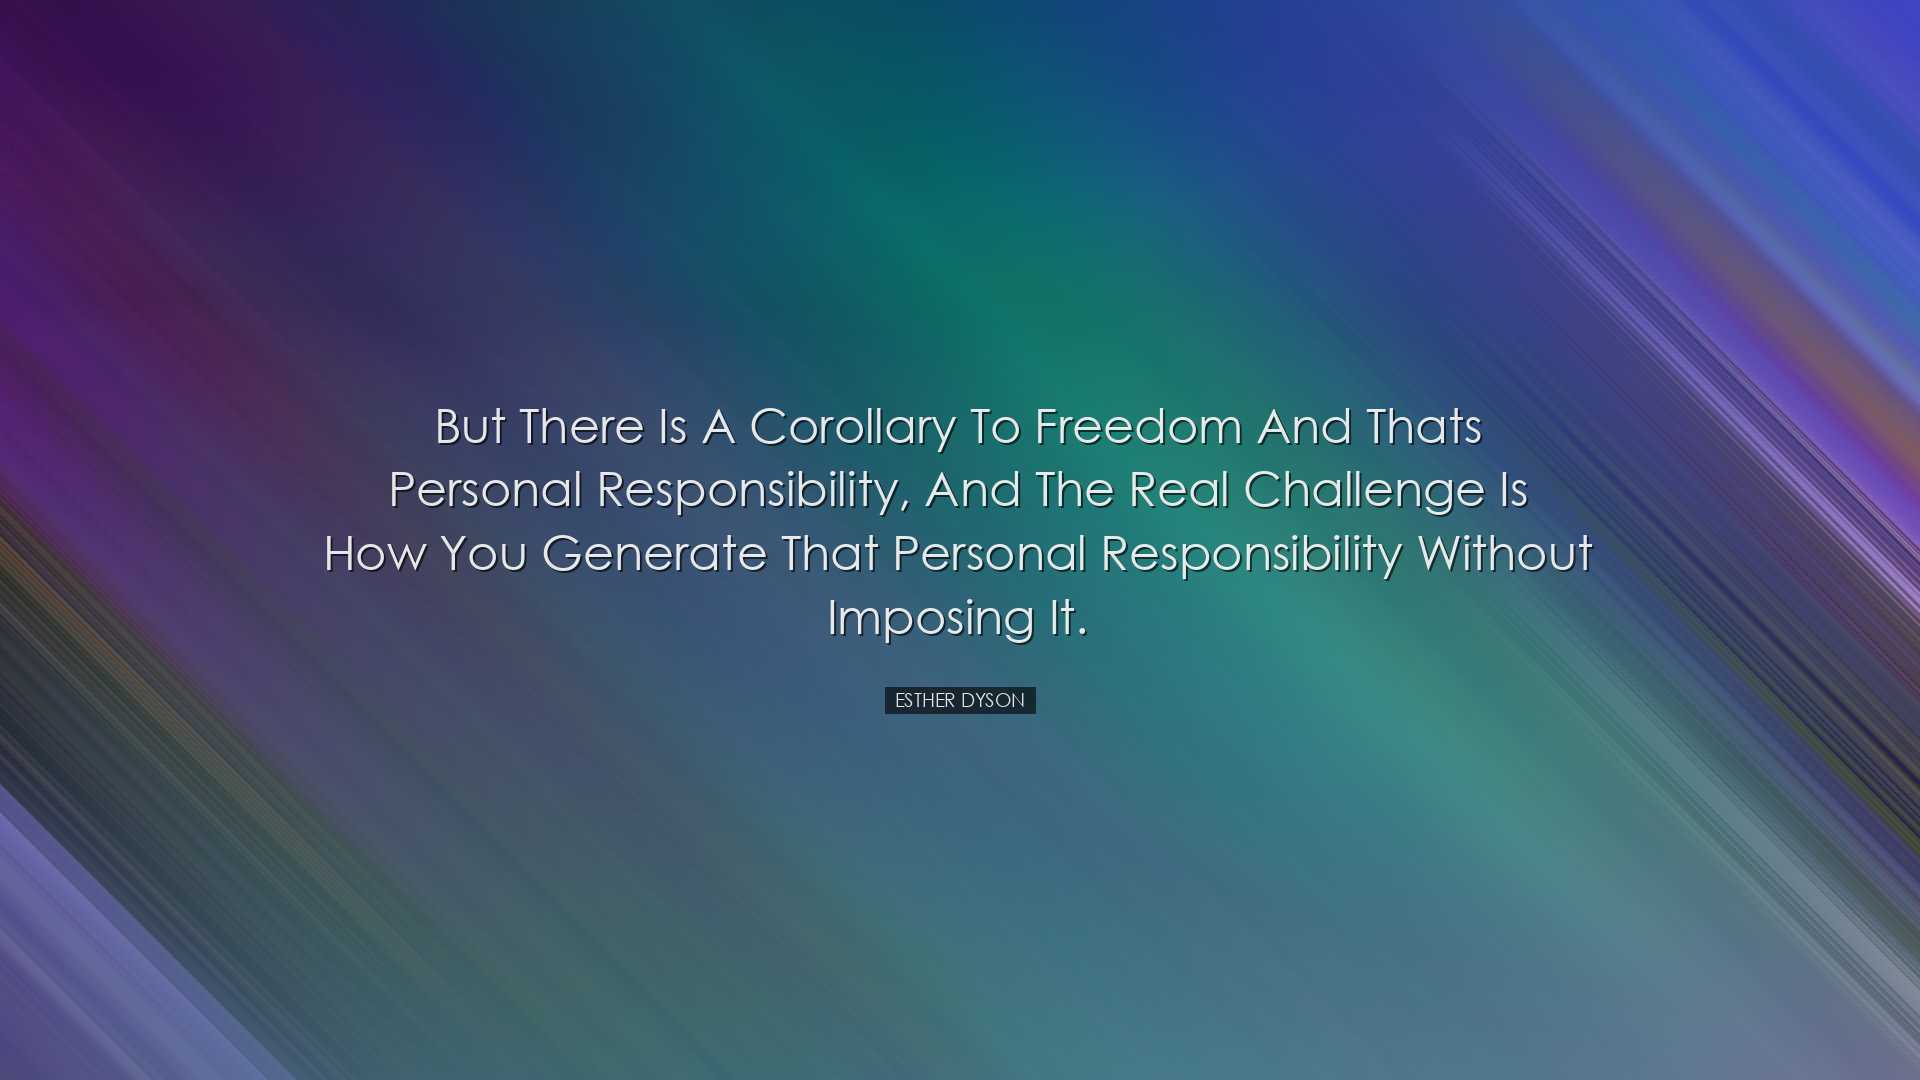 But there is a corollary to freedom and thats personal responsibil